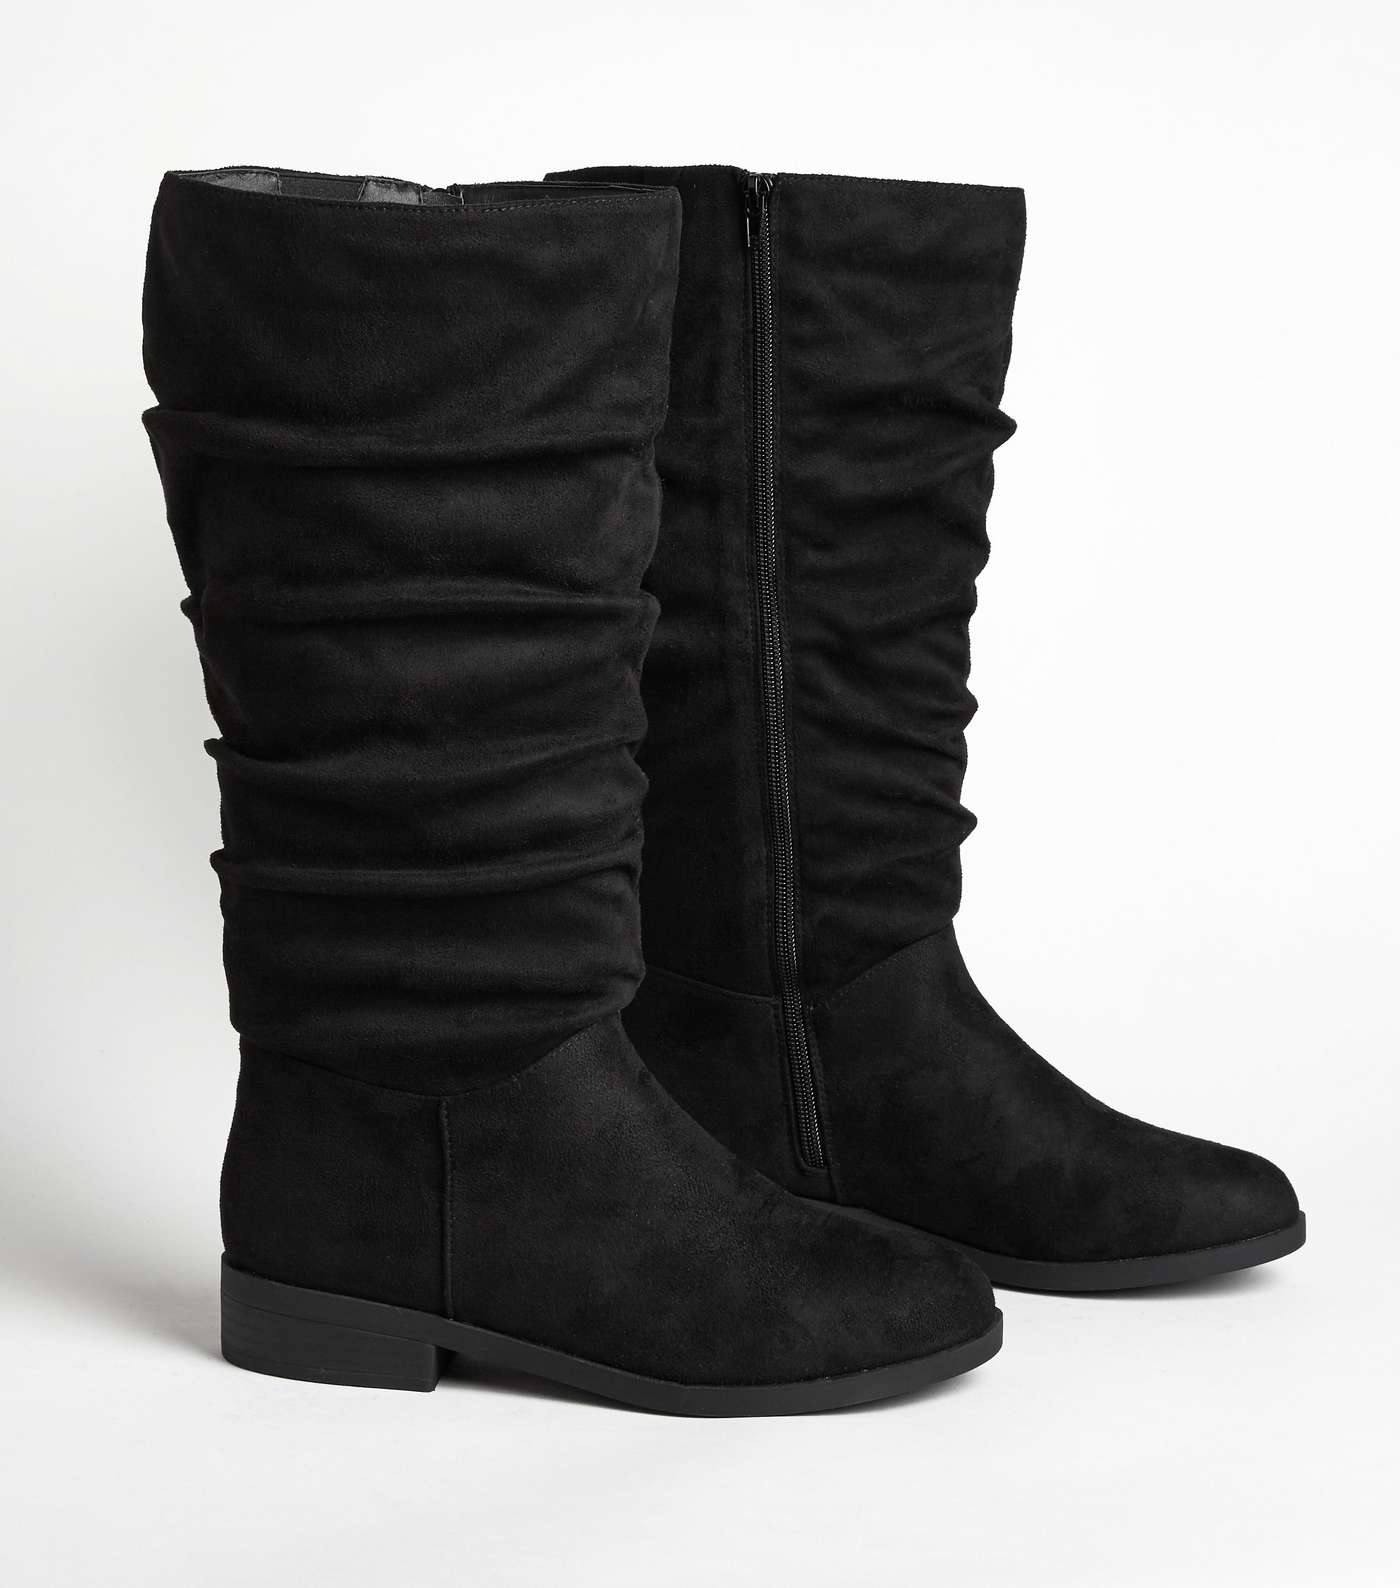 Extra Calf Fit Black Slouch Knee High Flat Boots 